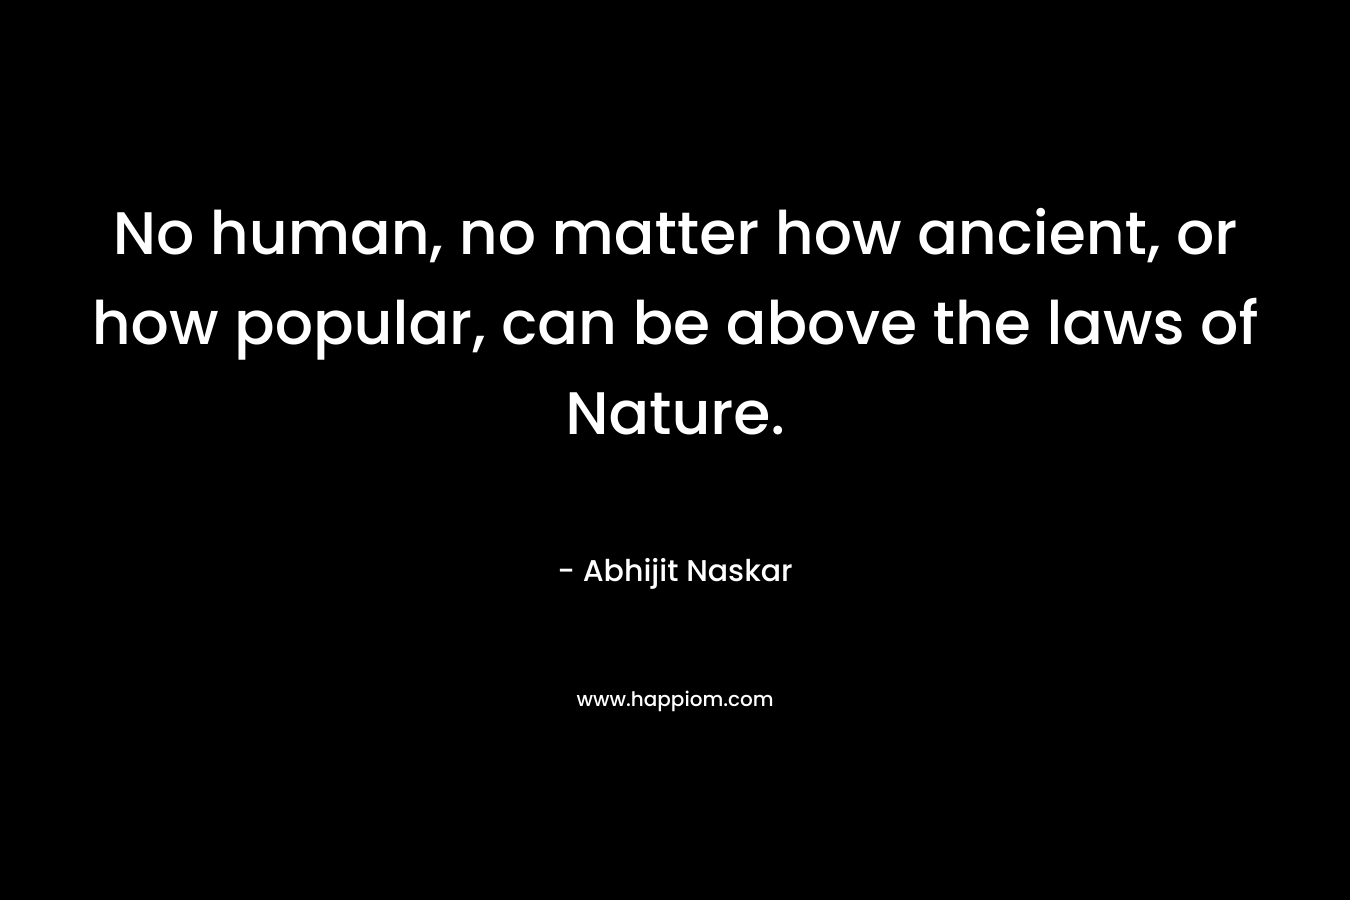 No human, no matter how ancient, or how popular, can be above the laws of Nature.